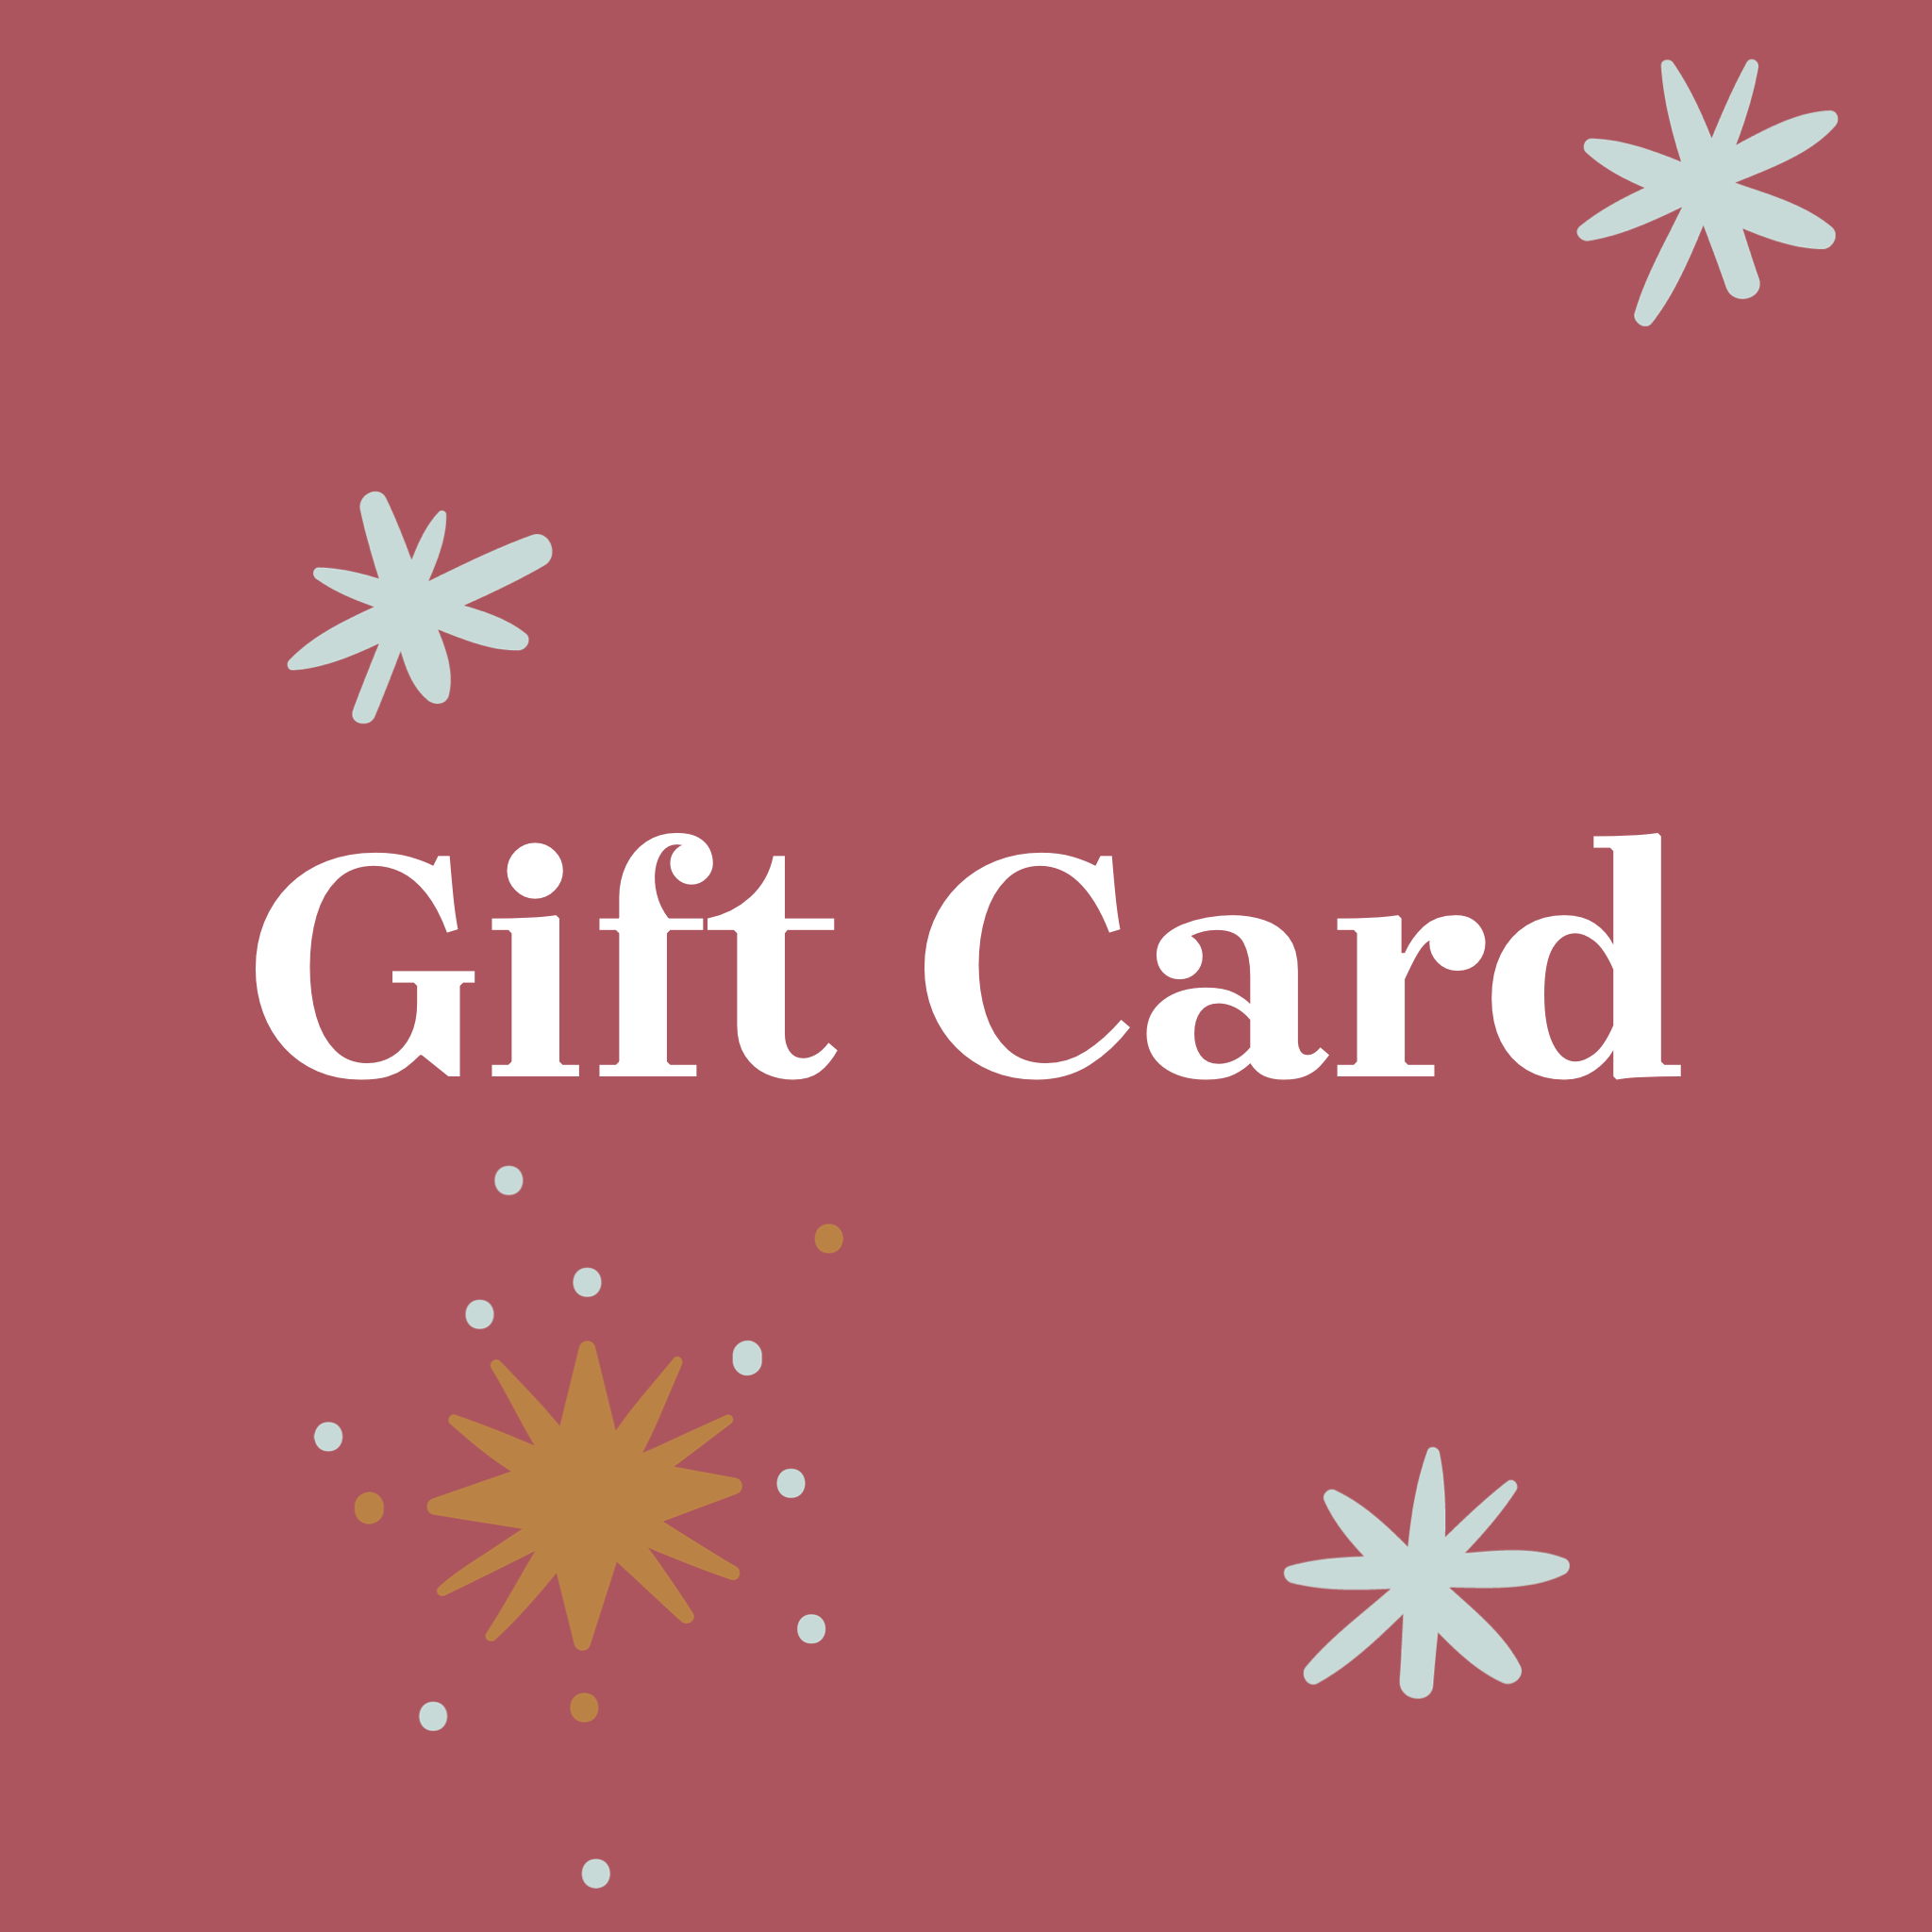 Clothed In Strength Gift Card